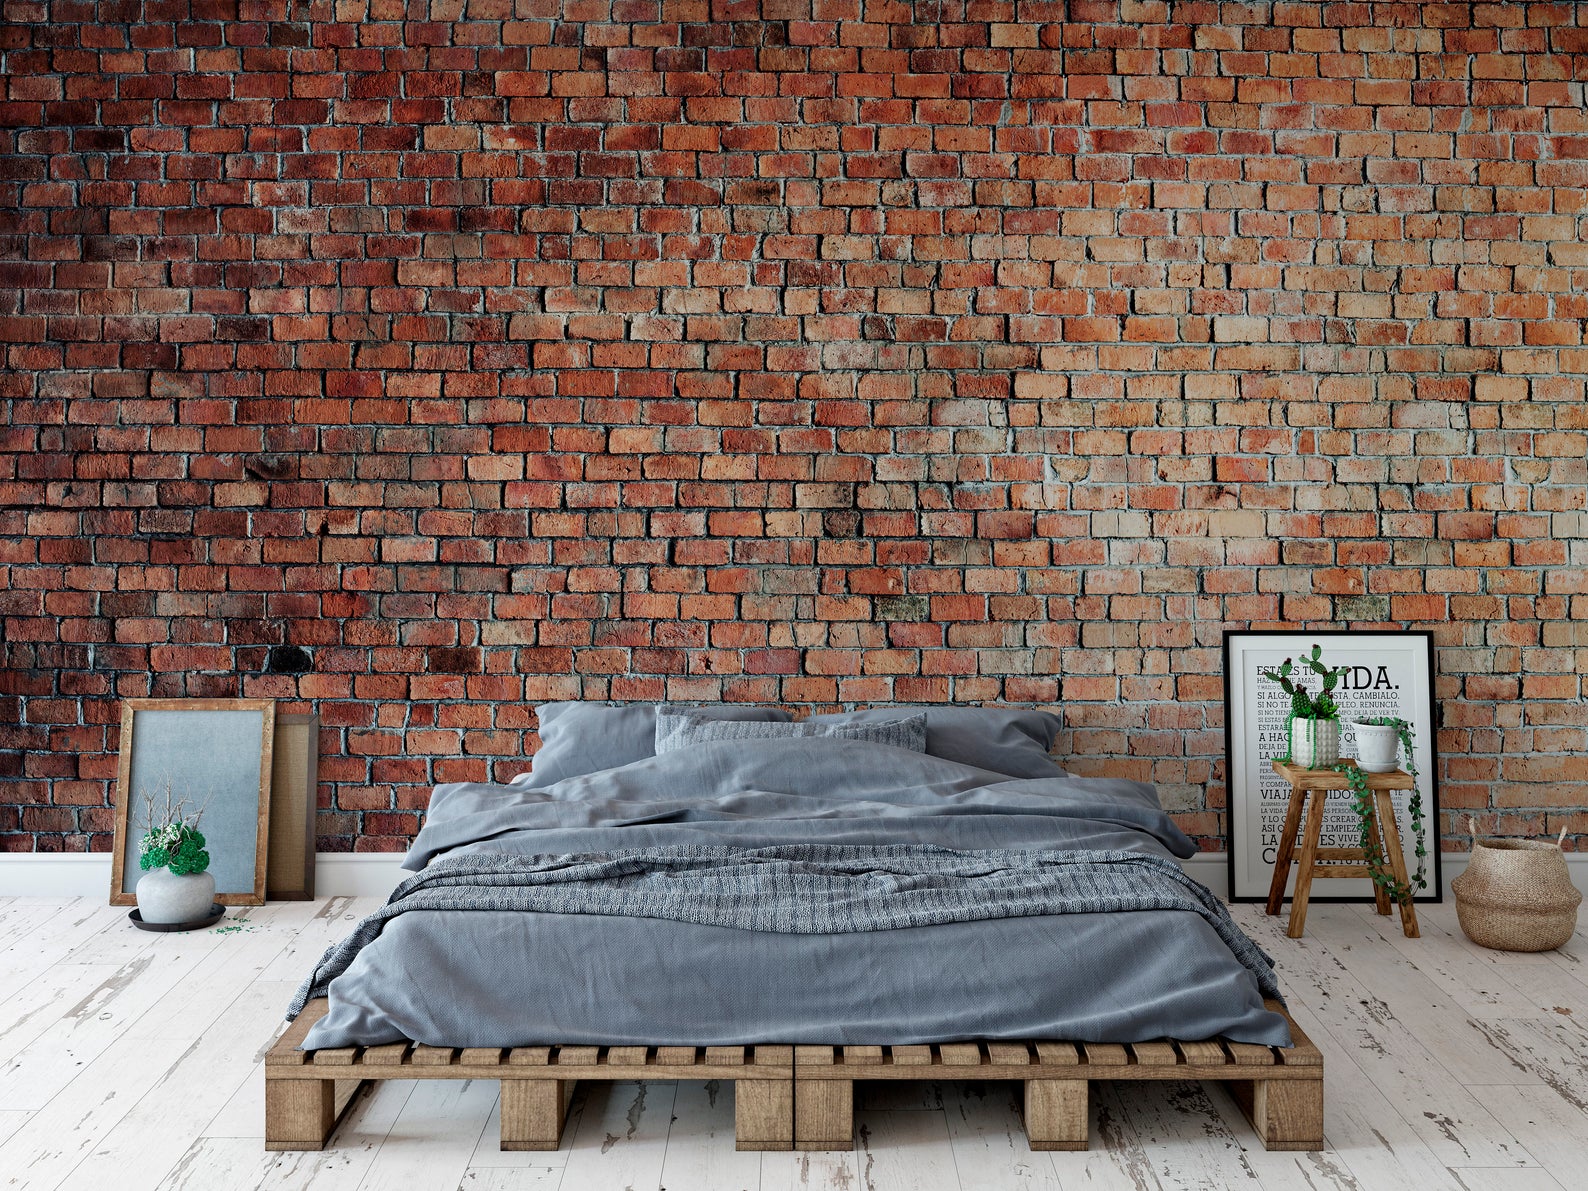 A stylish bedroom setting with Realistic Red Brick Wallpaper as a statement wall behind a bed with grey linen and a wooden pallet base. The brick wall adds a cozy and industrial charm to the room.